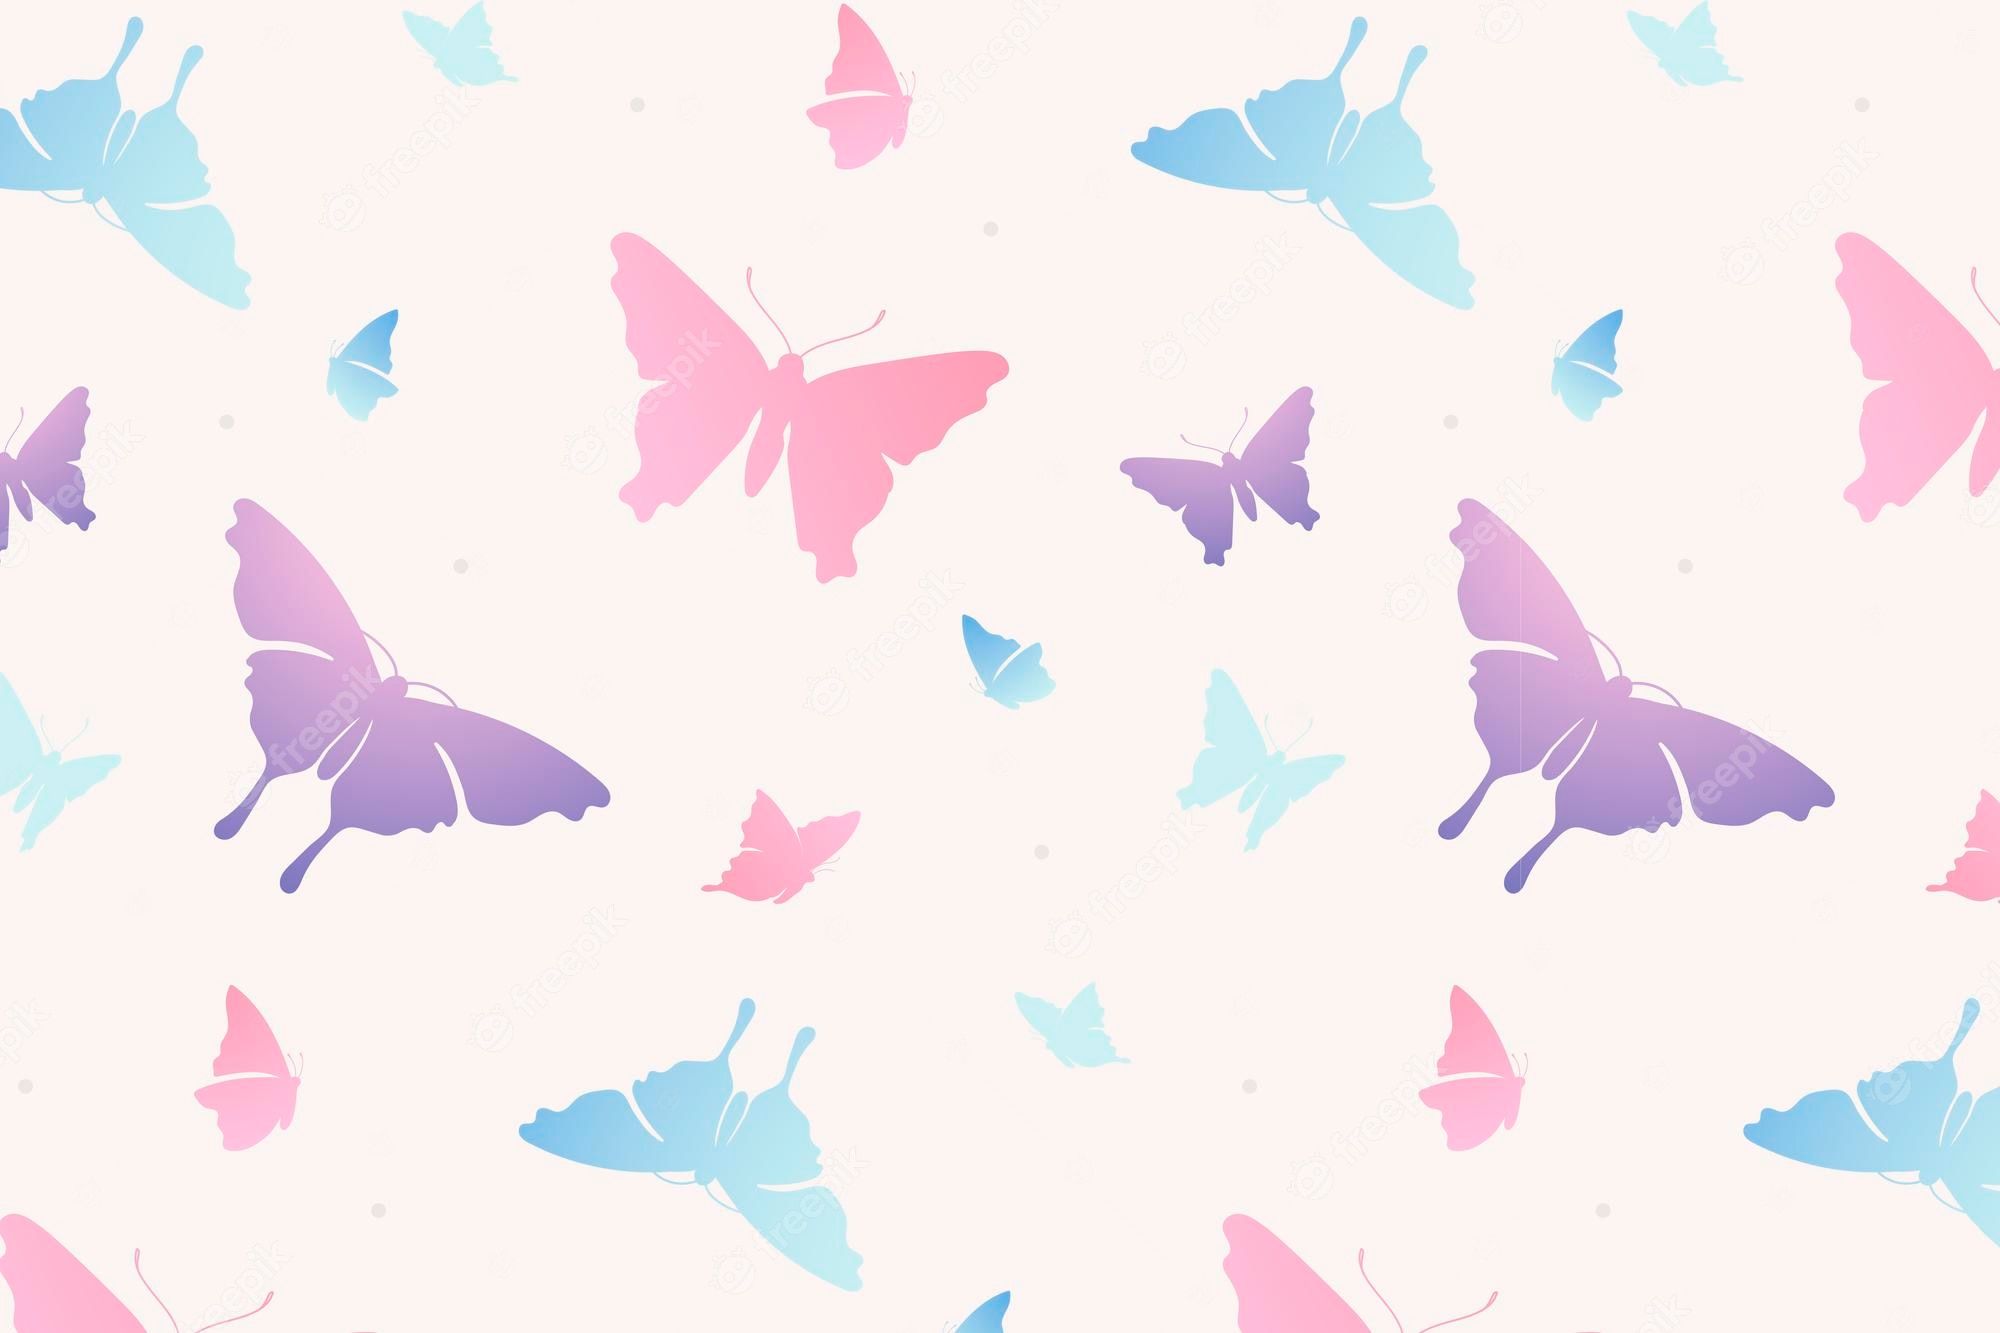 Butterflies of pink and blue colors on a white background. - Butterfly